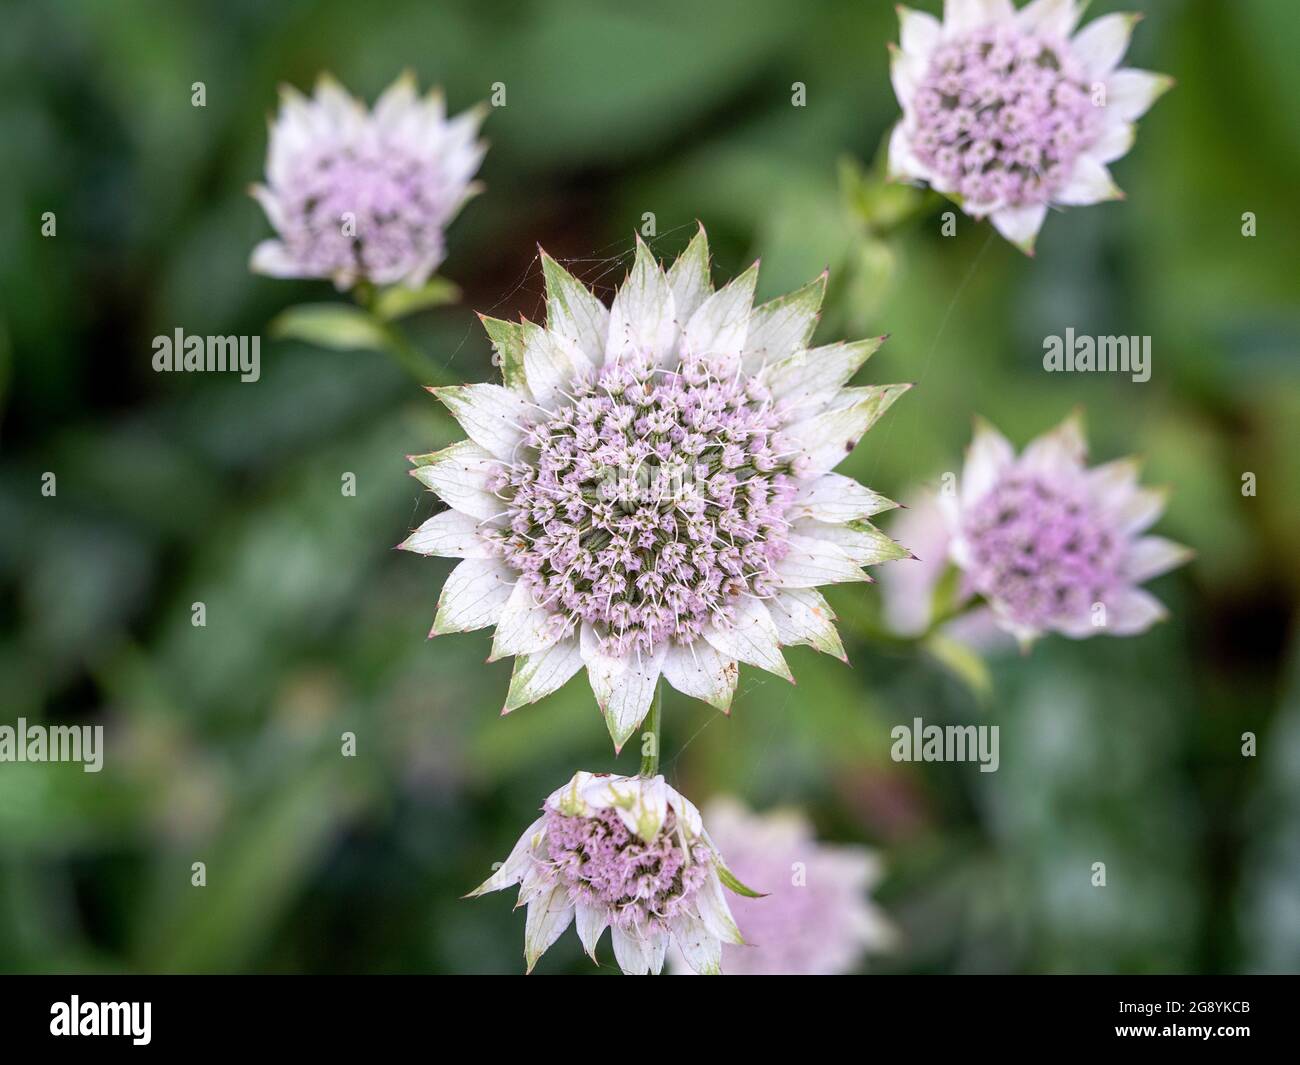 Astrantia major 'Buckland' with its pale pink star shaped flowers surrounded by white bracts tipped with green. Growing in a UK garden. Stock Photo